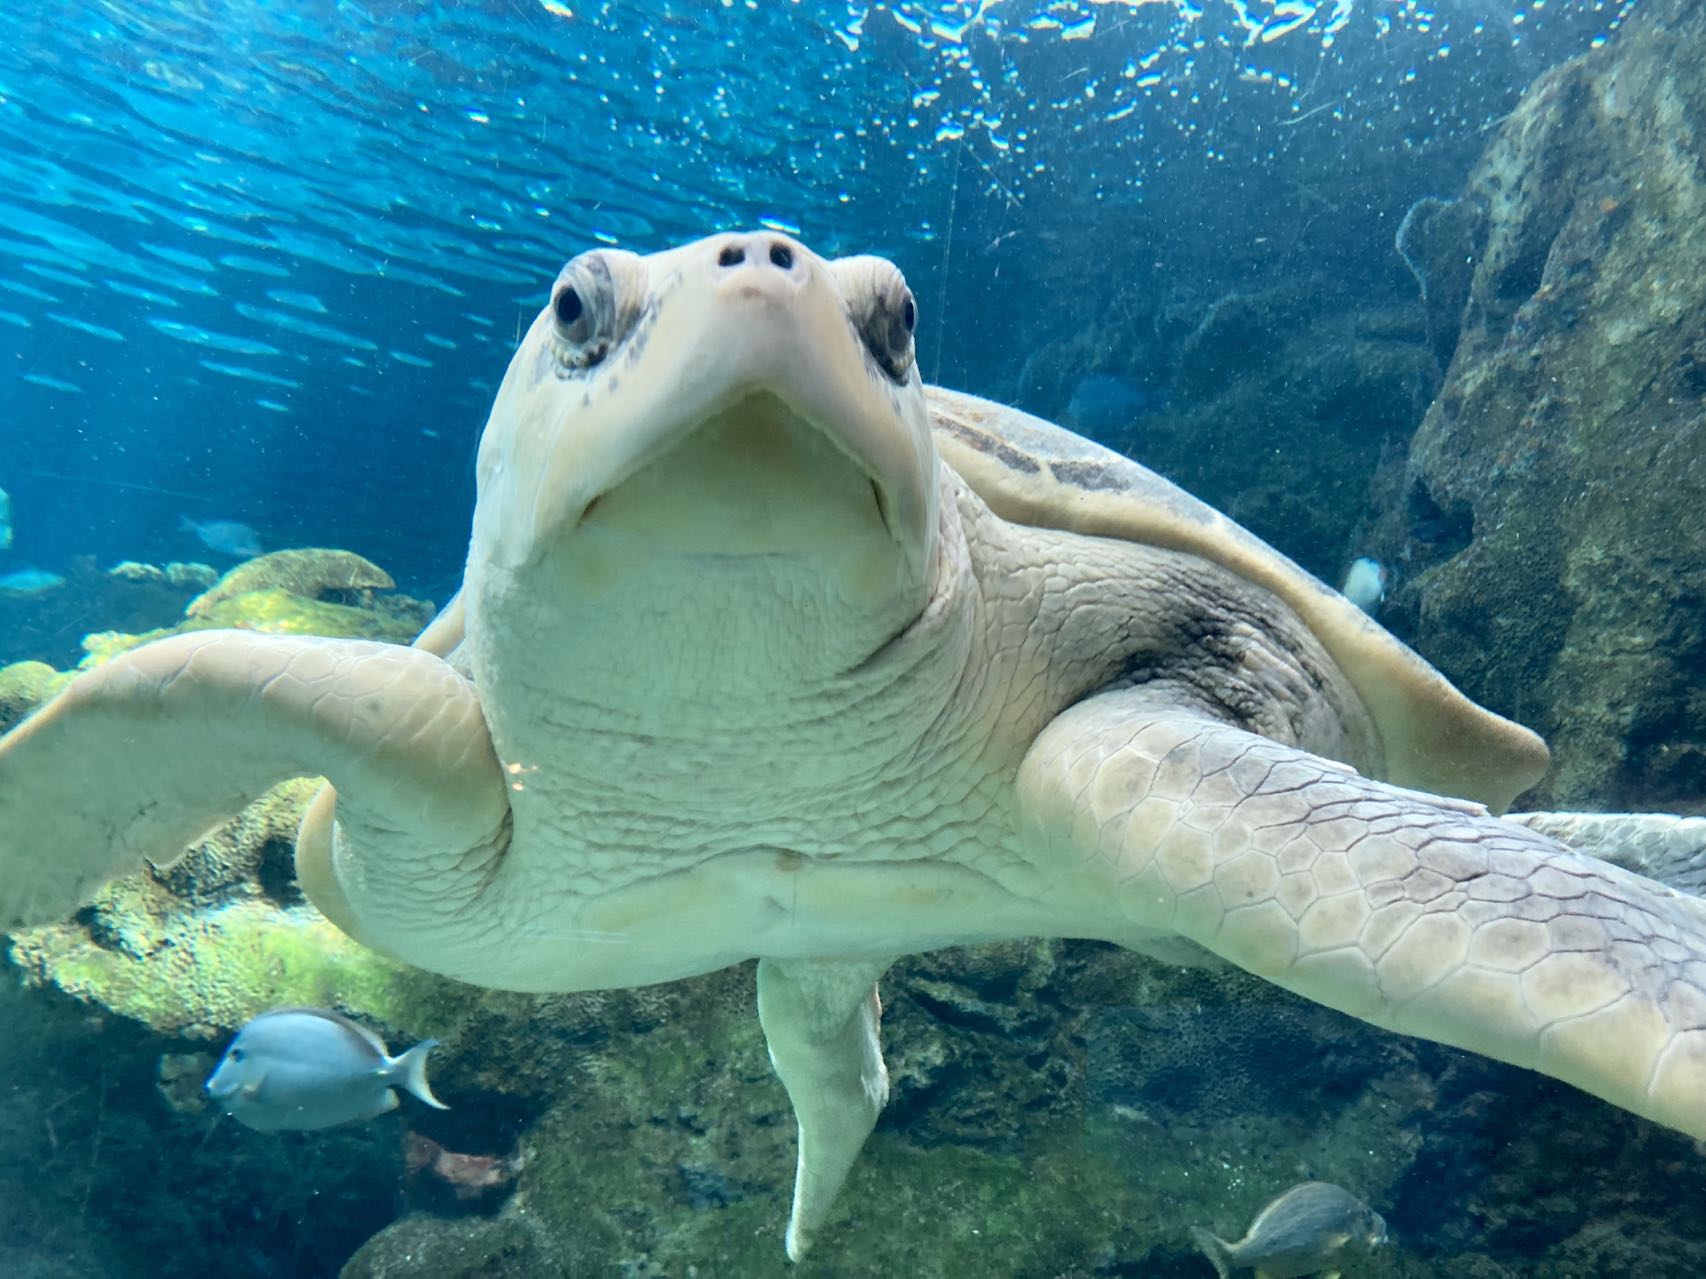 Close up of a sea turtle underwater.